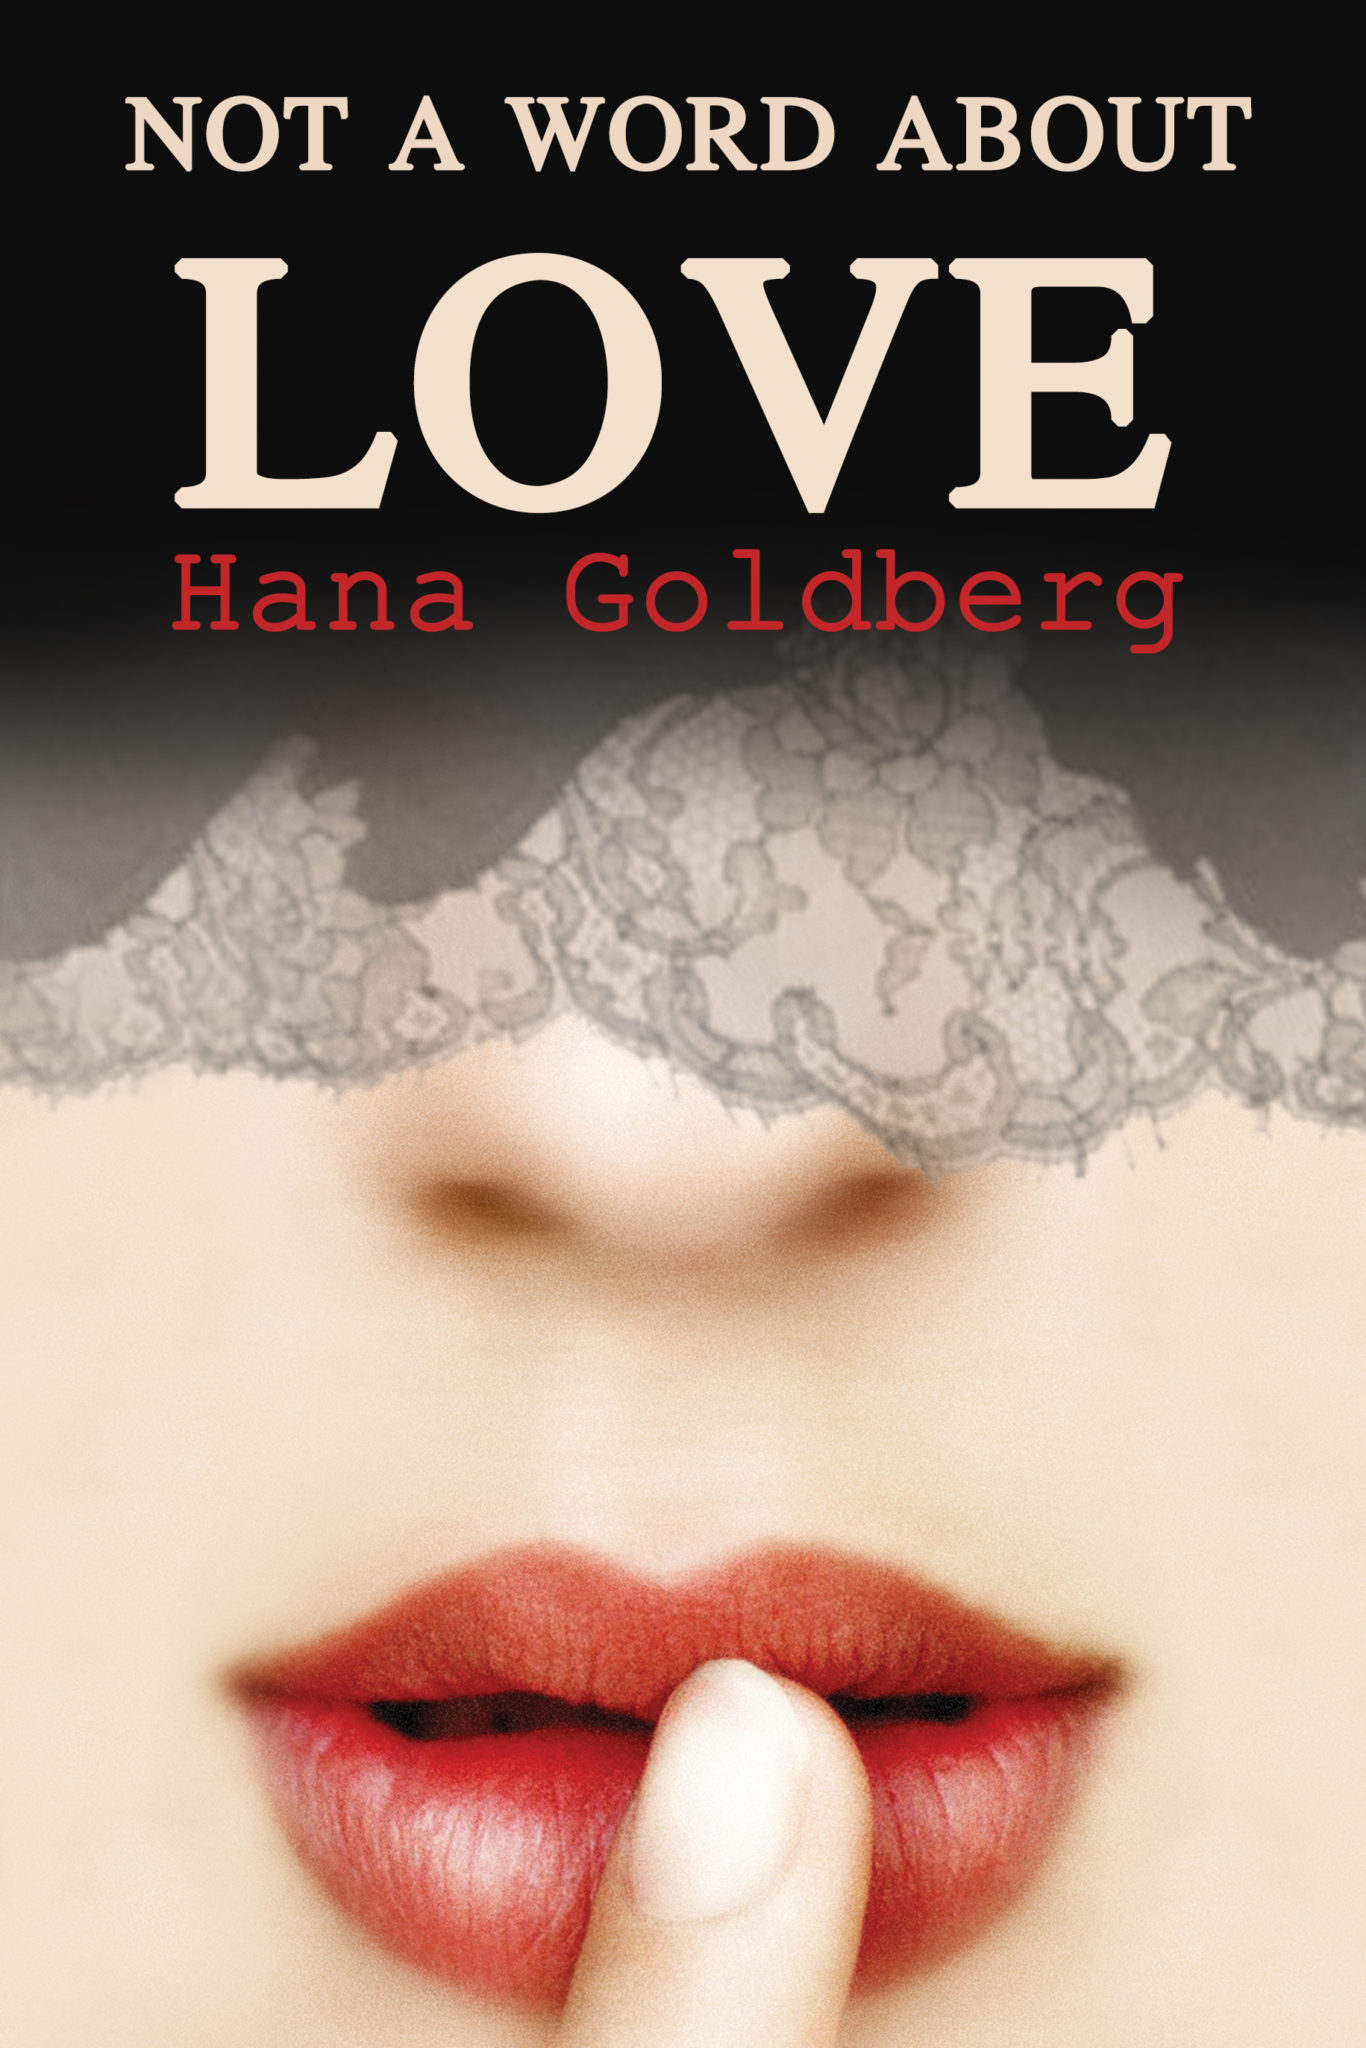 NOT A WORD ABOUT LOVE: Contemporary Romance by HANA GOLDBERG